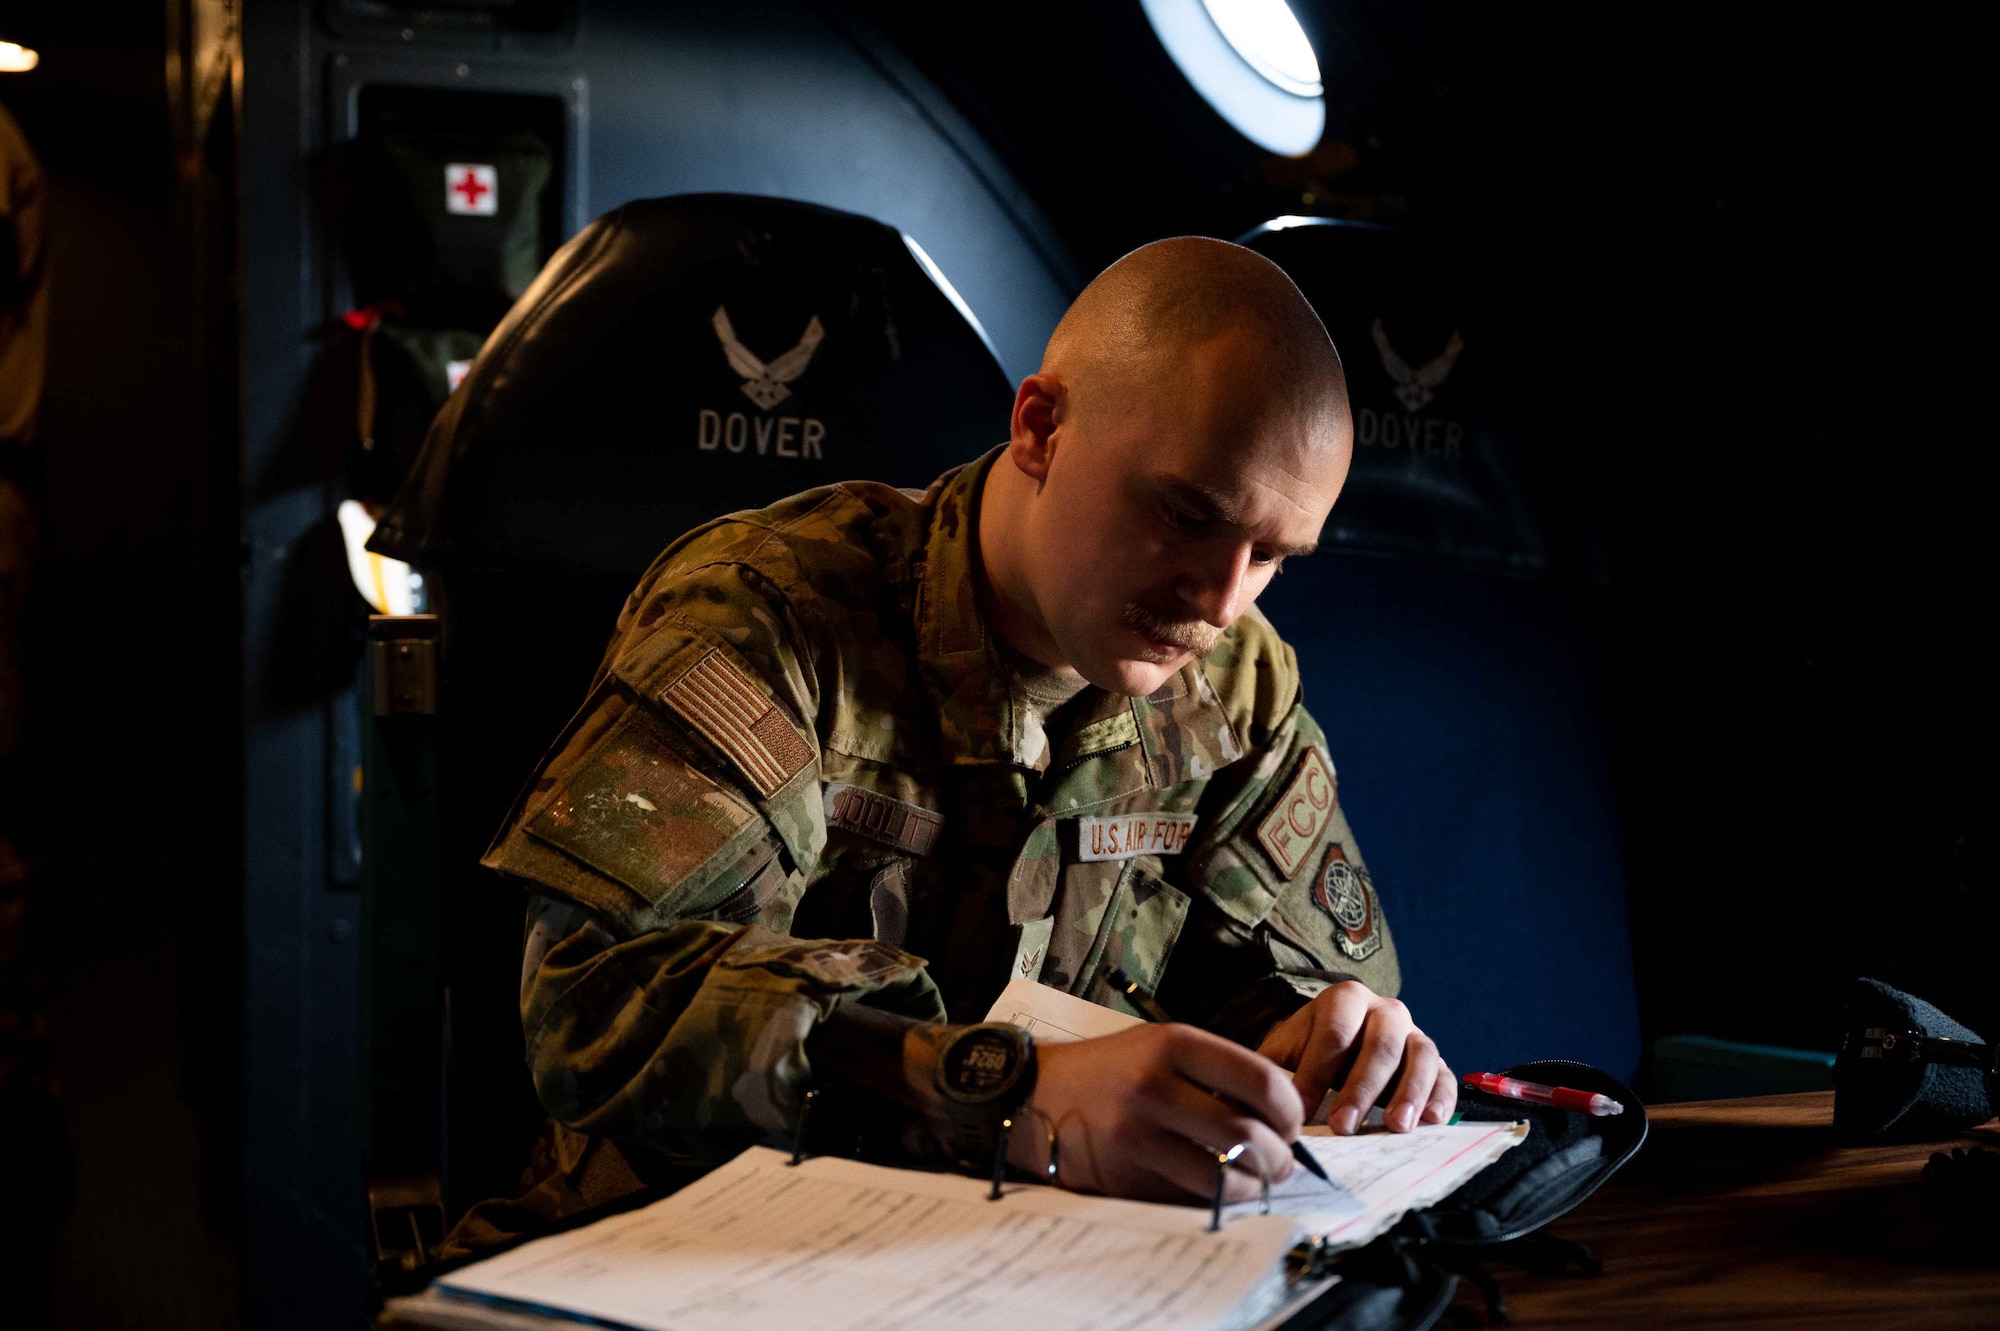 Senior Airman Bailey Doolittle, 436th Aircraft Maintenance Squadron flying crew chief, checks maintenance records on a C-5M Super Galaxy before takeoff at Dover Air Force Base, Delaware, Dec. 17, 2021. The 9th Airlift Squadron delivered supplies to aid the Joint Base Pearl Harbor-Hickam (JBPHH), Hawaii water quality recovery, a joint U.S. military initiative working closely with the State of Hawaii, Department of Health, Honolulu Board of Water Supply, U.S. government and independent organizations to restore a safe water delivery system to JBPHH military housing communities through testing, treatment, and repair. For detailed information, including available resources and locations, and news, go to www.navy.mil/jointbasewater. (U.S. Air Force photo by Senior Airman Faith Schaefer)